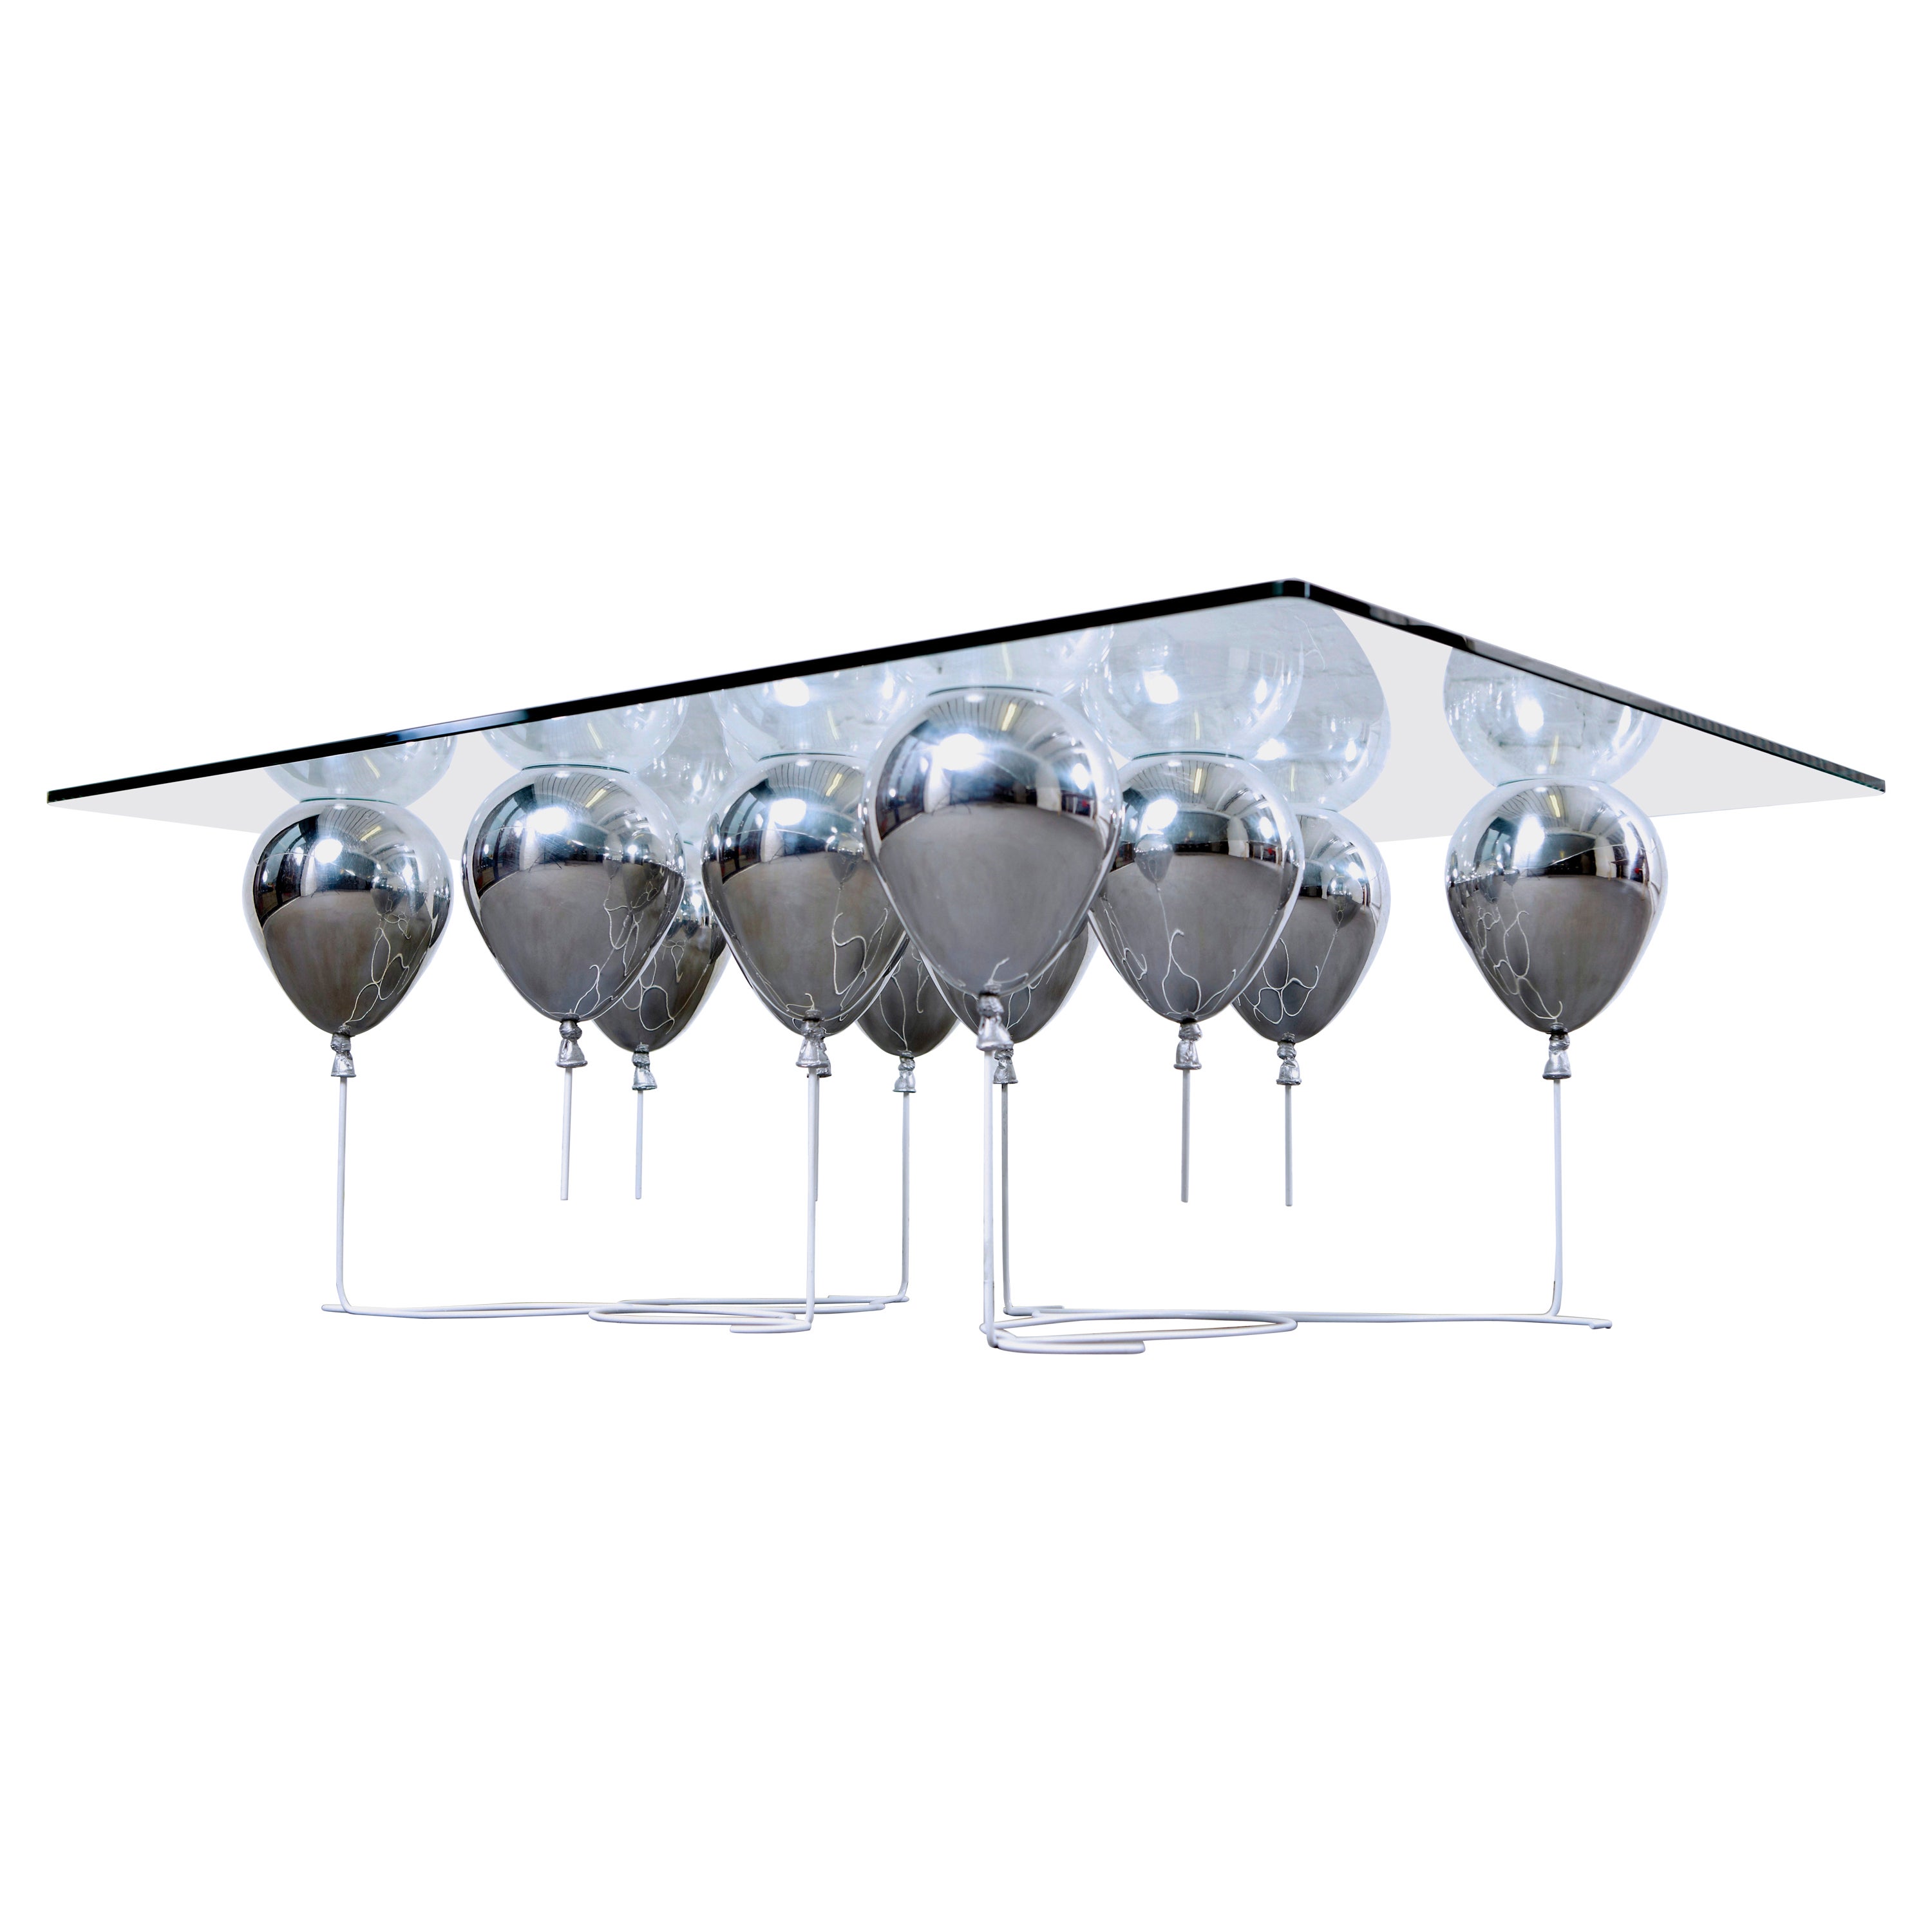 Modern Rectangular Coffee Table with White Legs and Silver Balloons For Sale